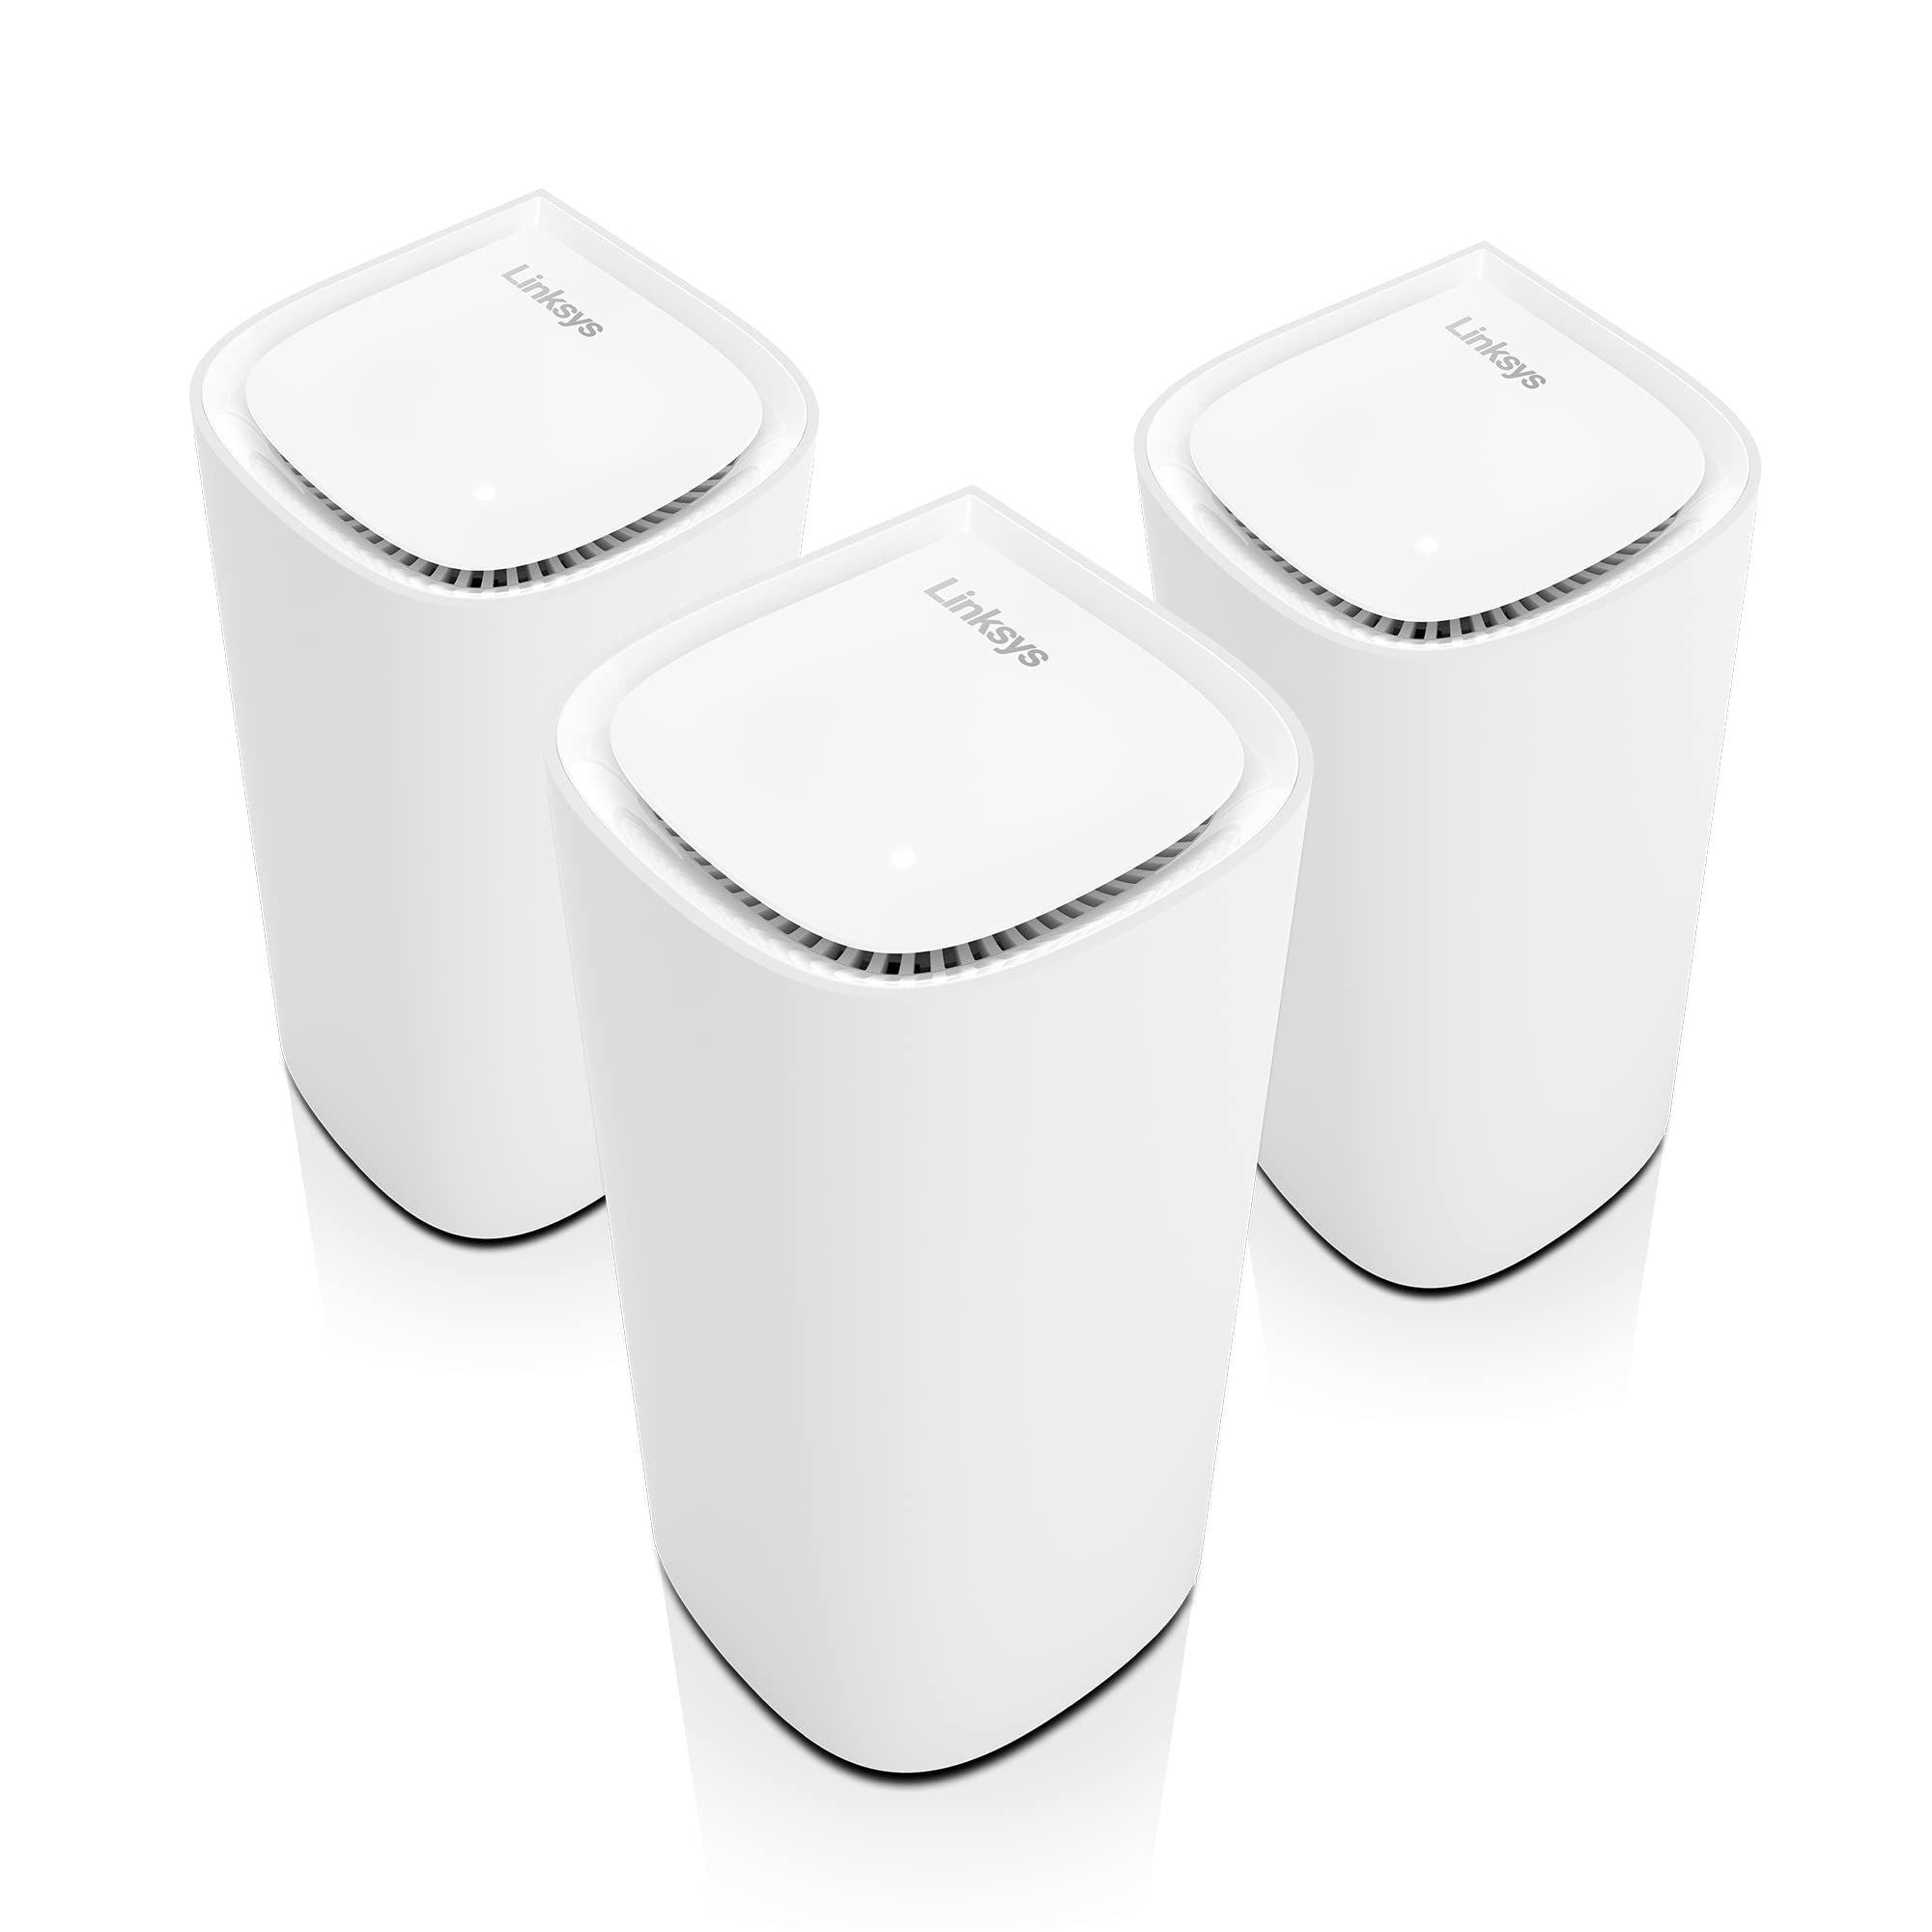 Linksys Velop Pro WiFi 6E Mesh System - Cognitive Mesh Router with 6 Ghz Band Access & 5.4 (AXE5400) Gbps True Gigabit Speed - Whole-Home Coverage up to 9,000 sq. ft. & 600+ Devices - 3 Pack